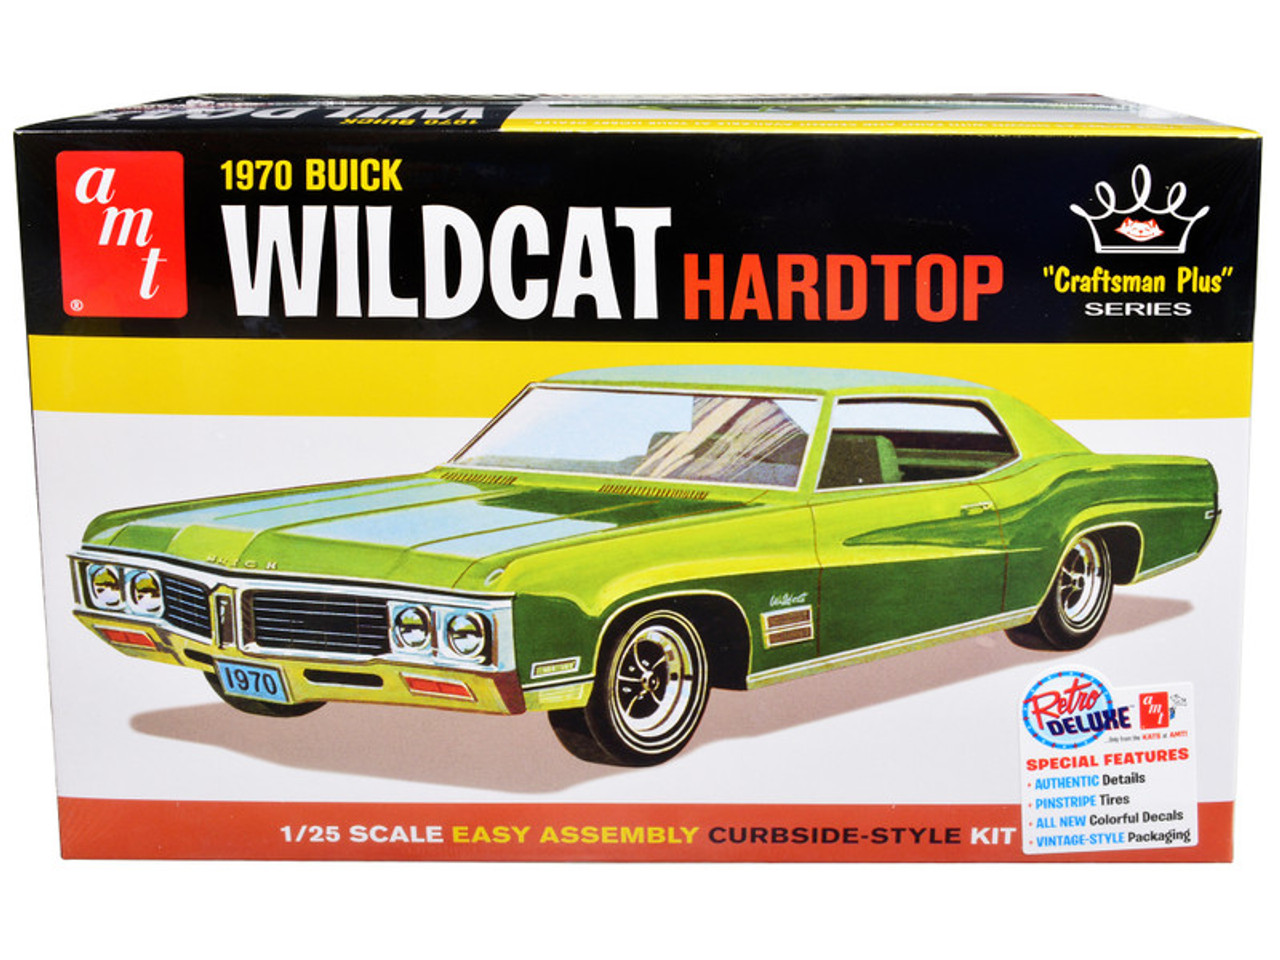 Skill 2 Model Kit 1970 Buick Wildcat Hardtop "Craftsman Plus" Series 1/25 Scale Model by AMT